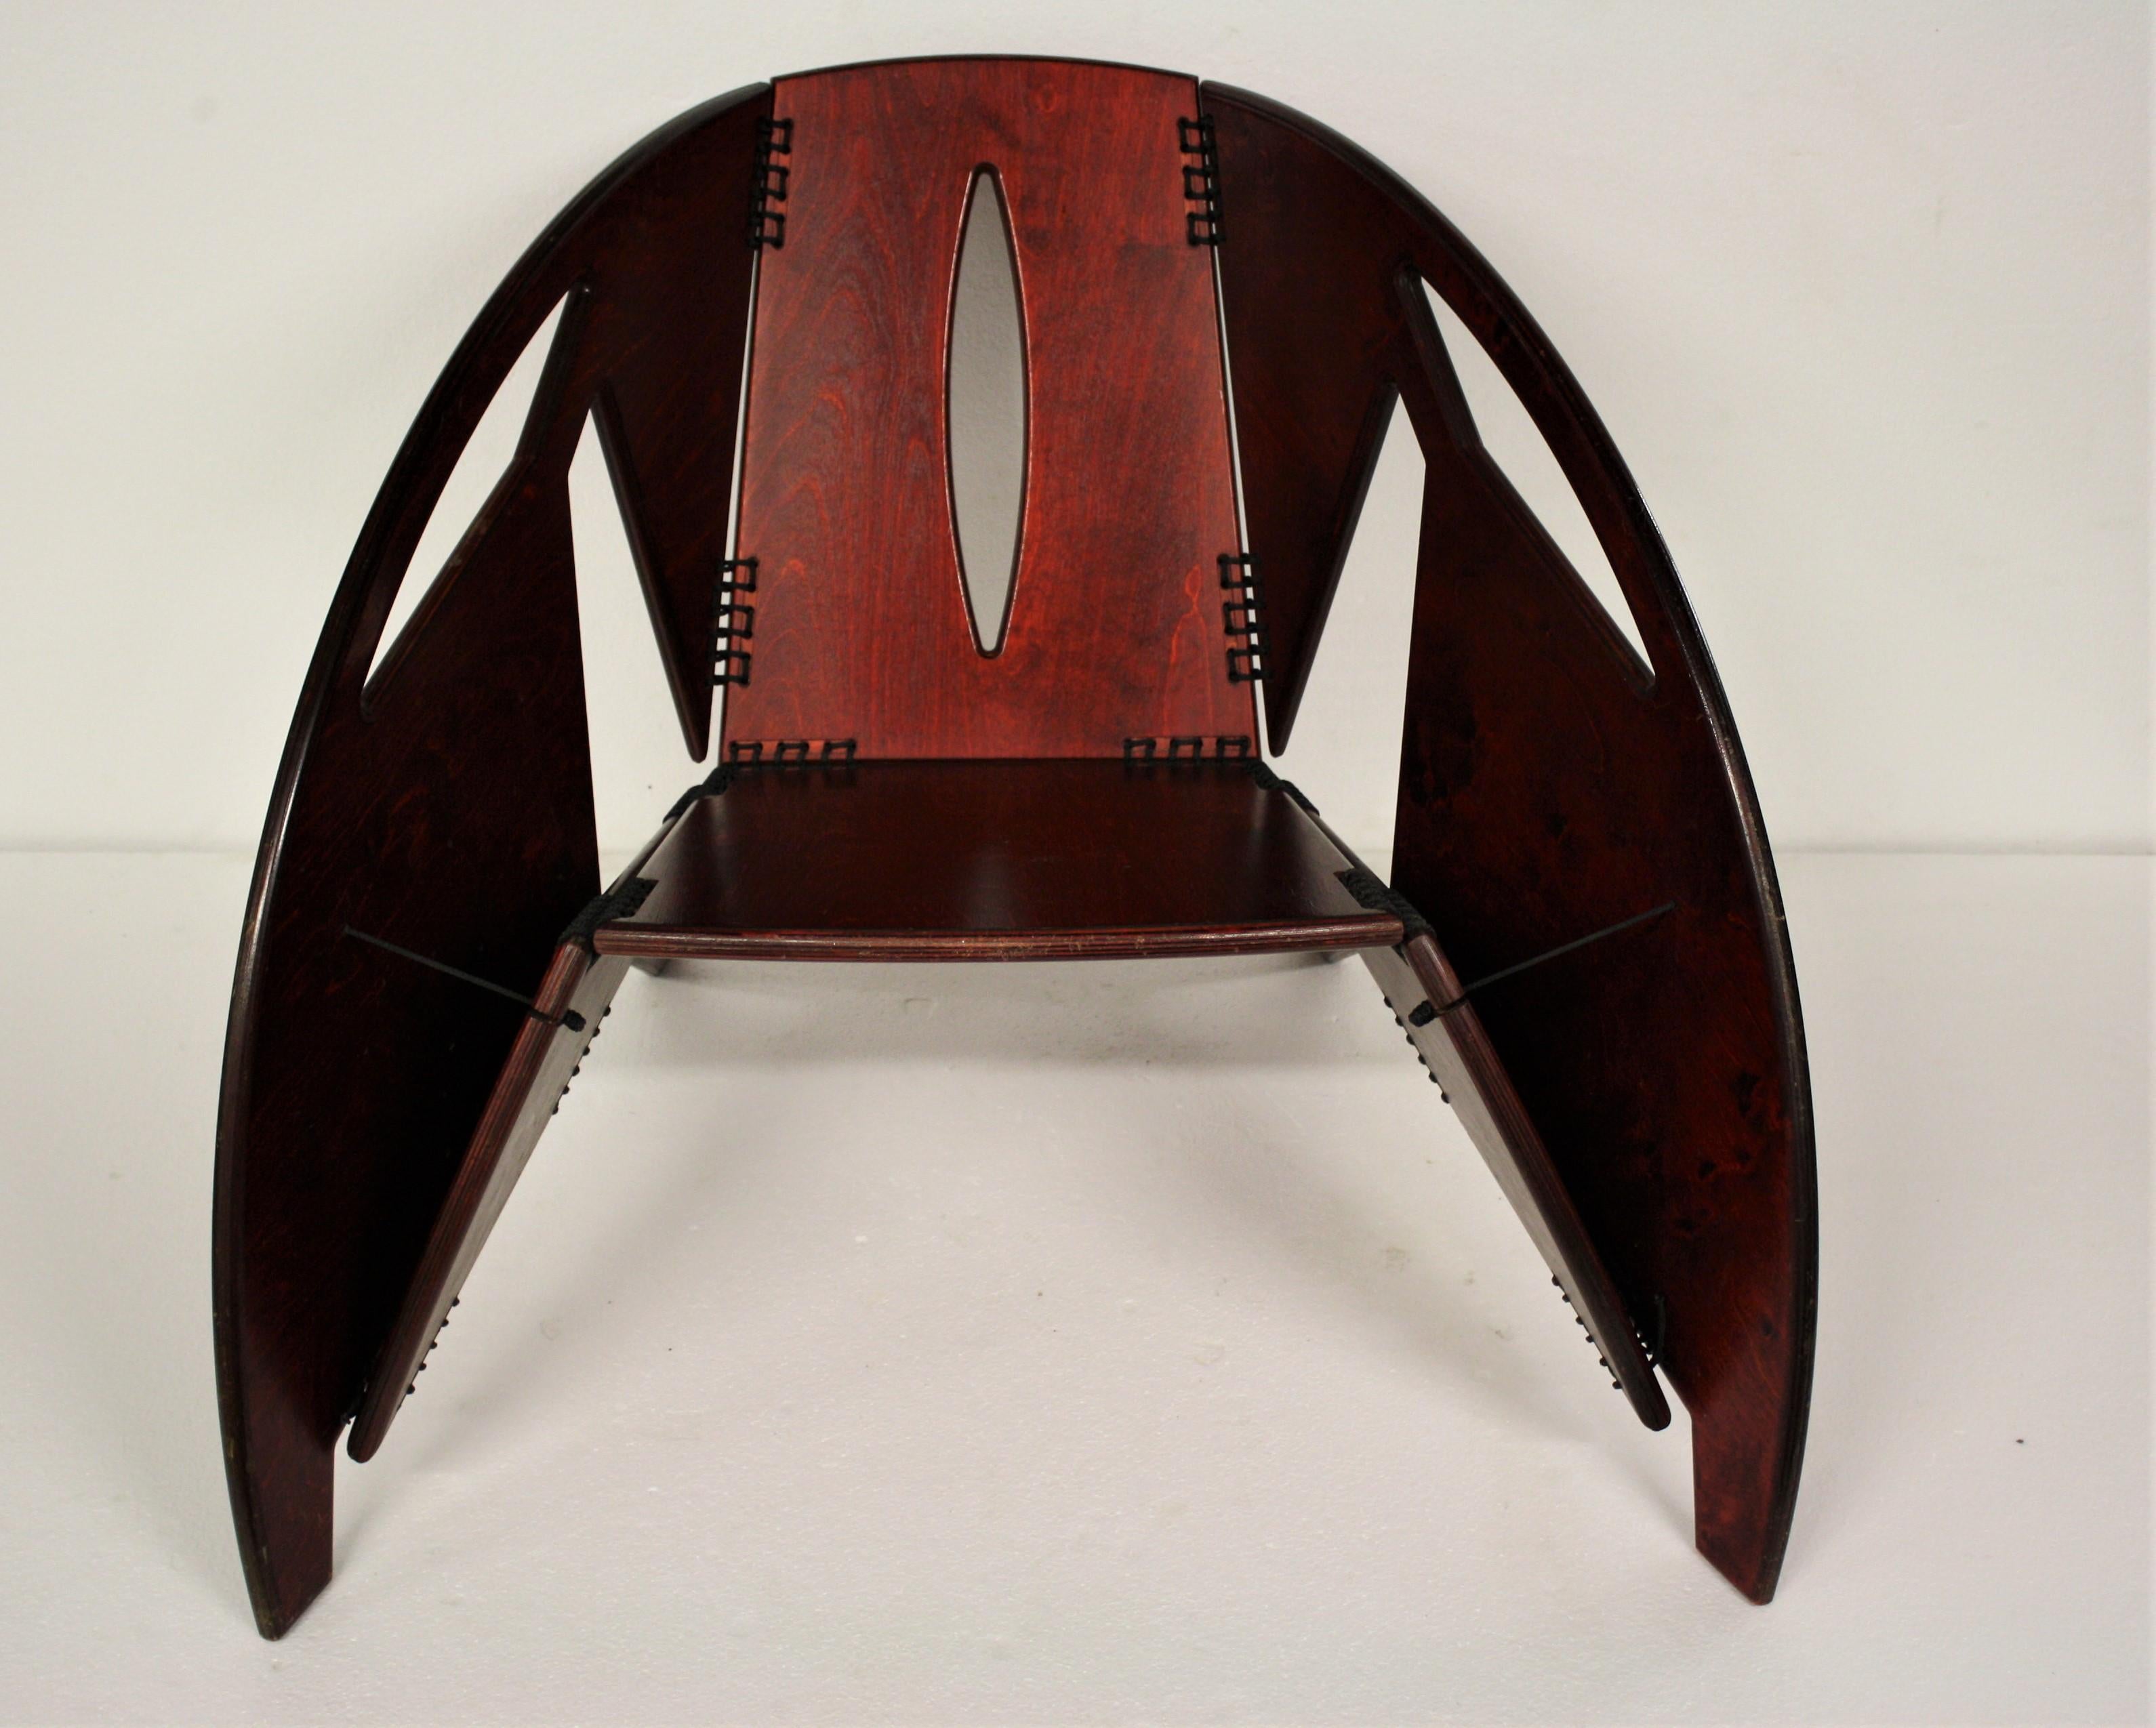 Unique Mid-Century Modern foldable lounge chair made from rosewood.

Although the designer remains unknown, the chair was certainly designed and crafted by a master mind.

The chair is fully foldable and doesn’t need one screw in it's design. It